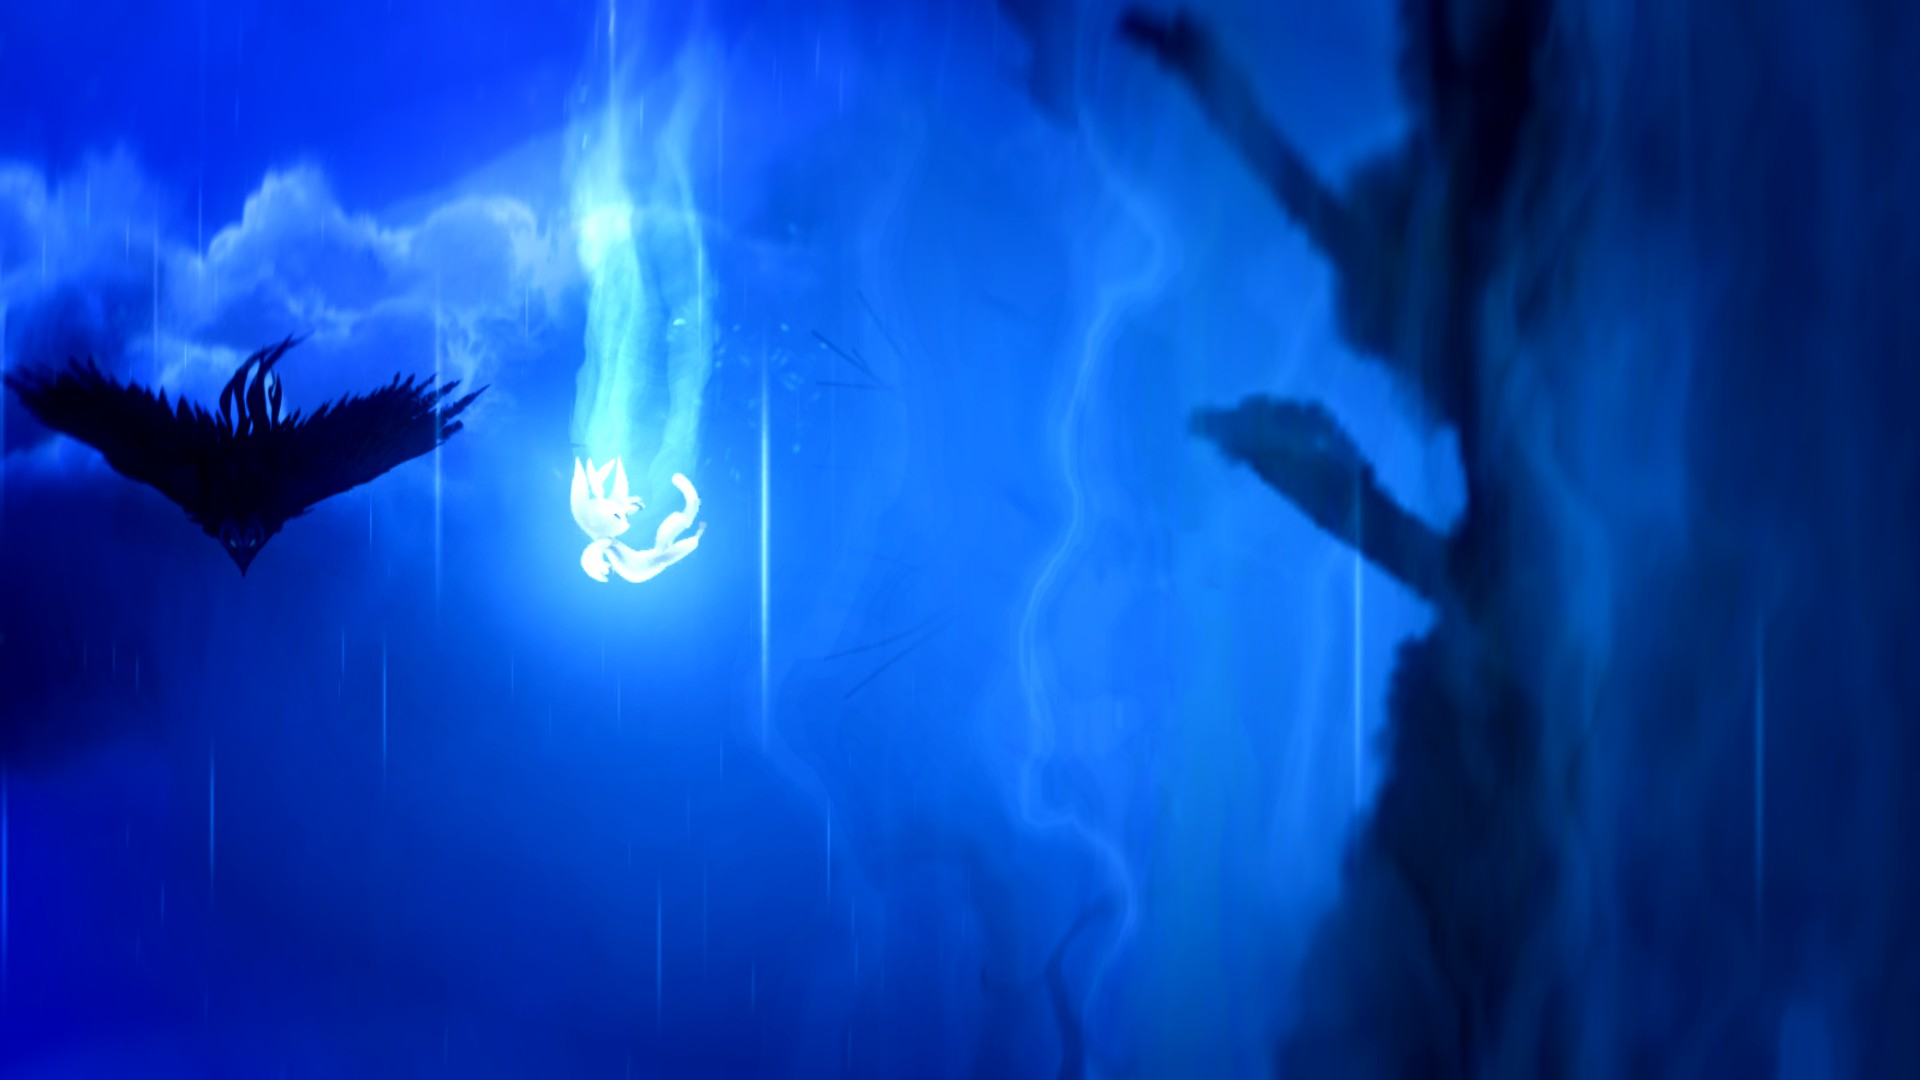 1920x1080 Ori and The Blind Forest Wallpaper dump () Album on Imgur